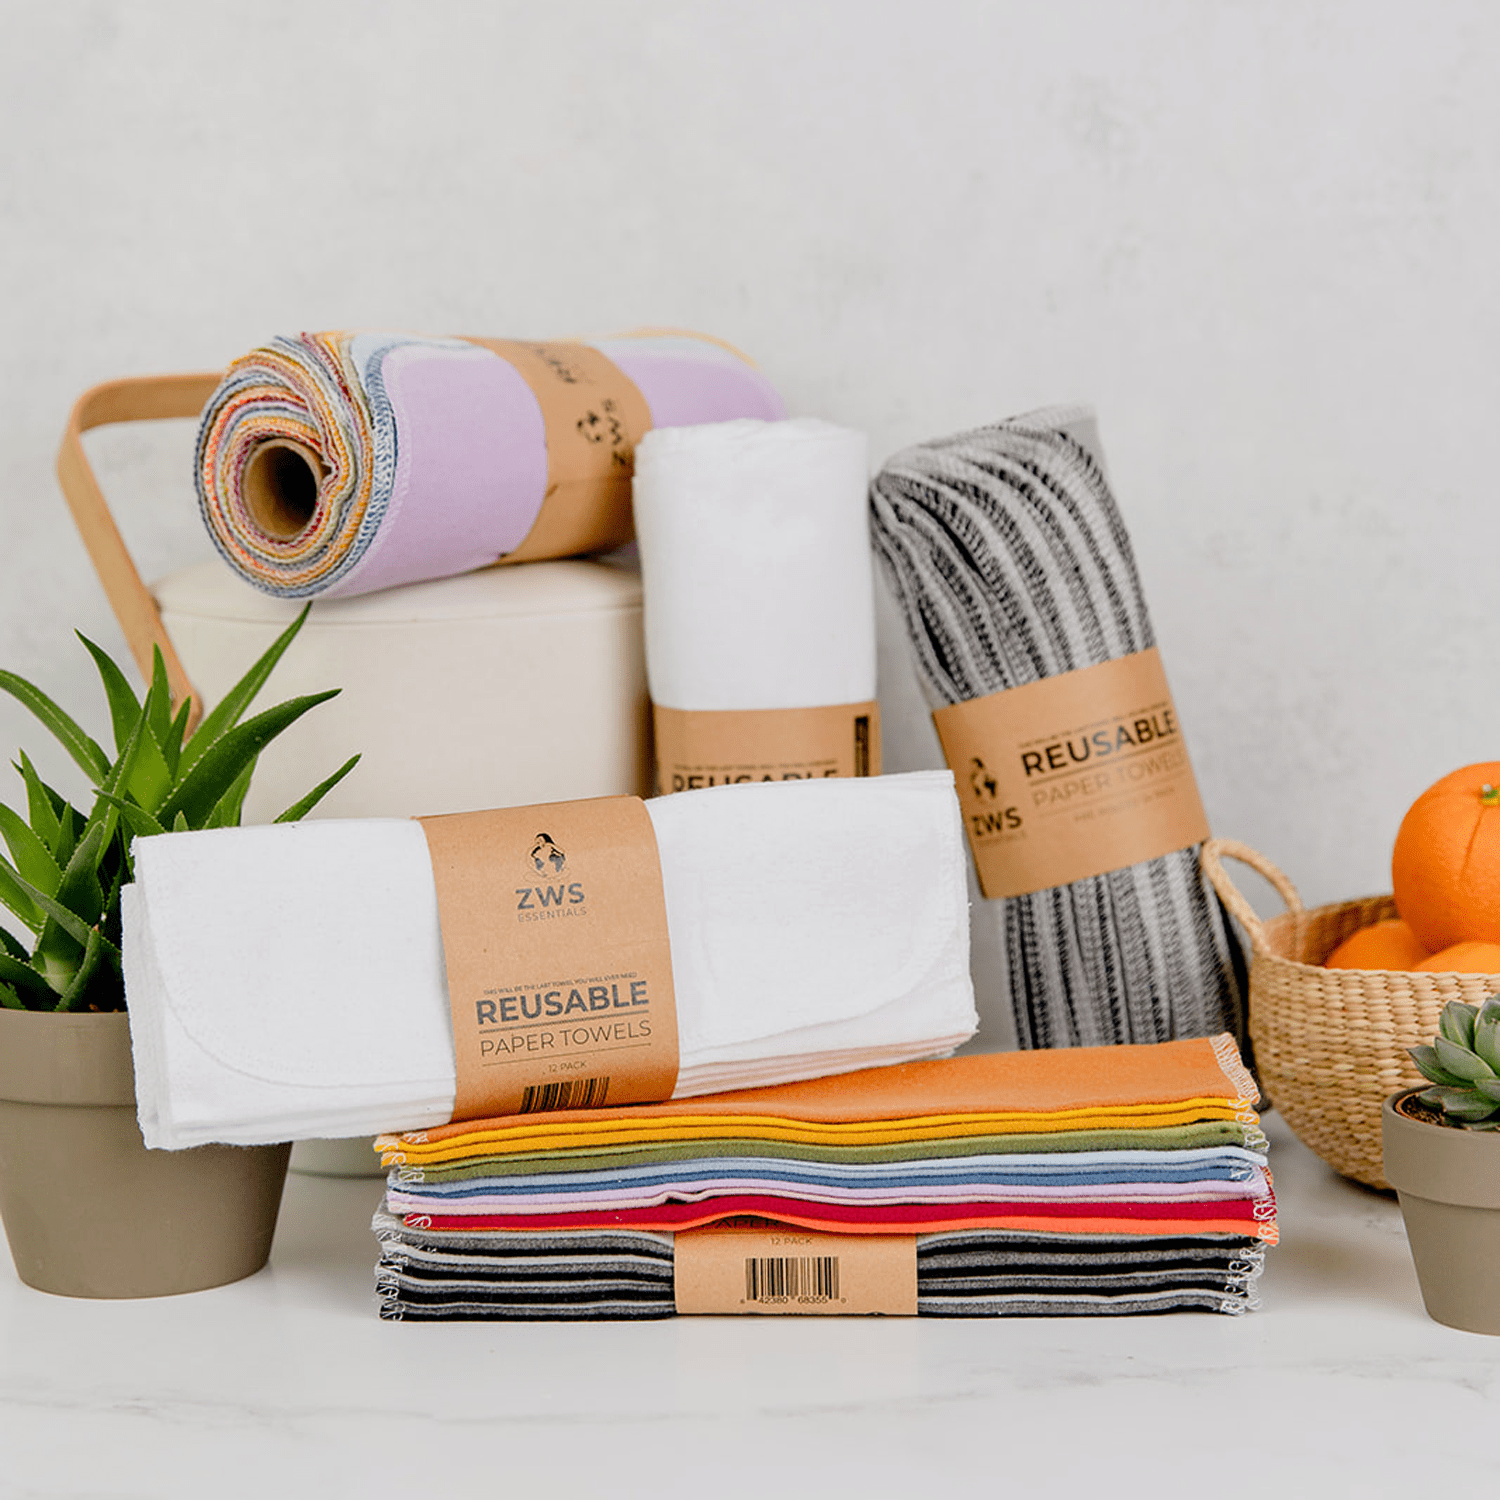 Reusable Paper Towels - 100% Organic Cotton, 12 or 24 Pack